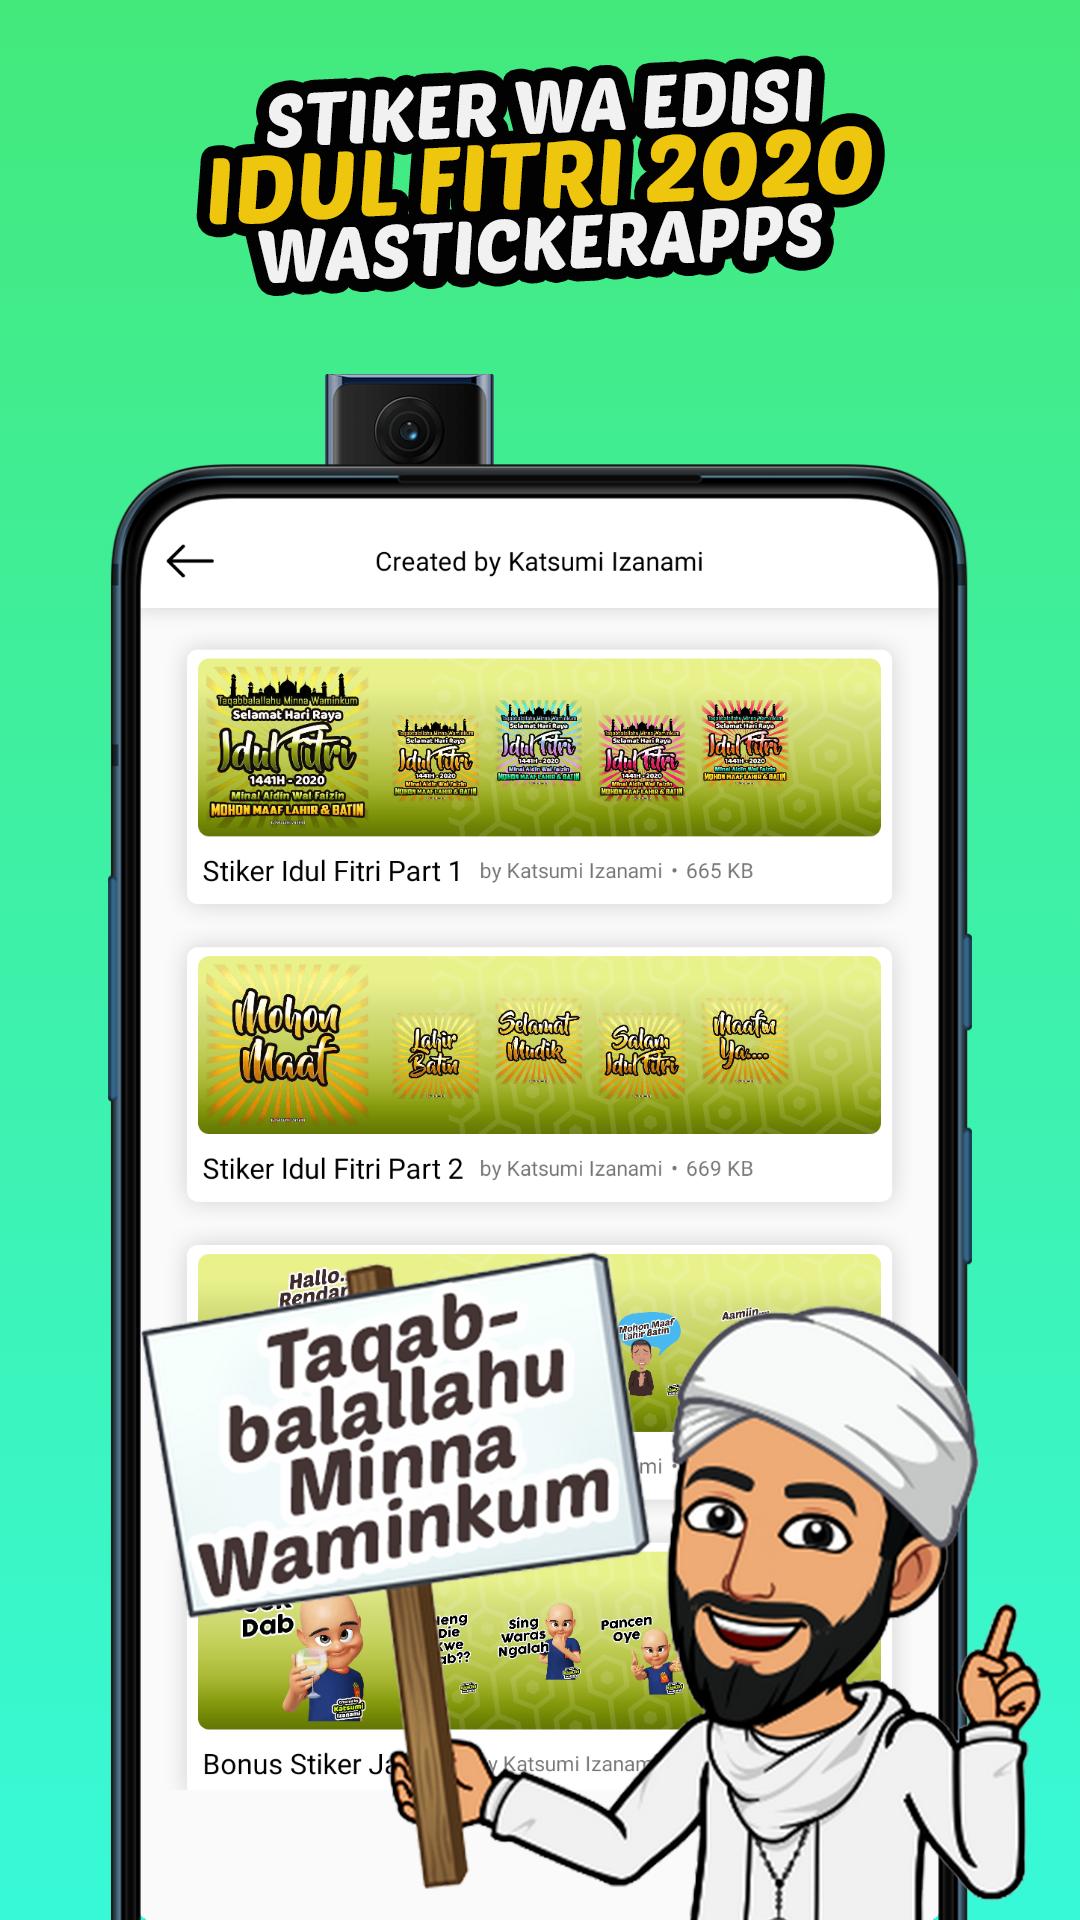 Stiker Idul Fitri 2020 Wastickerapps For Android Apk Download